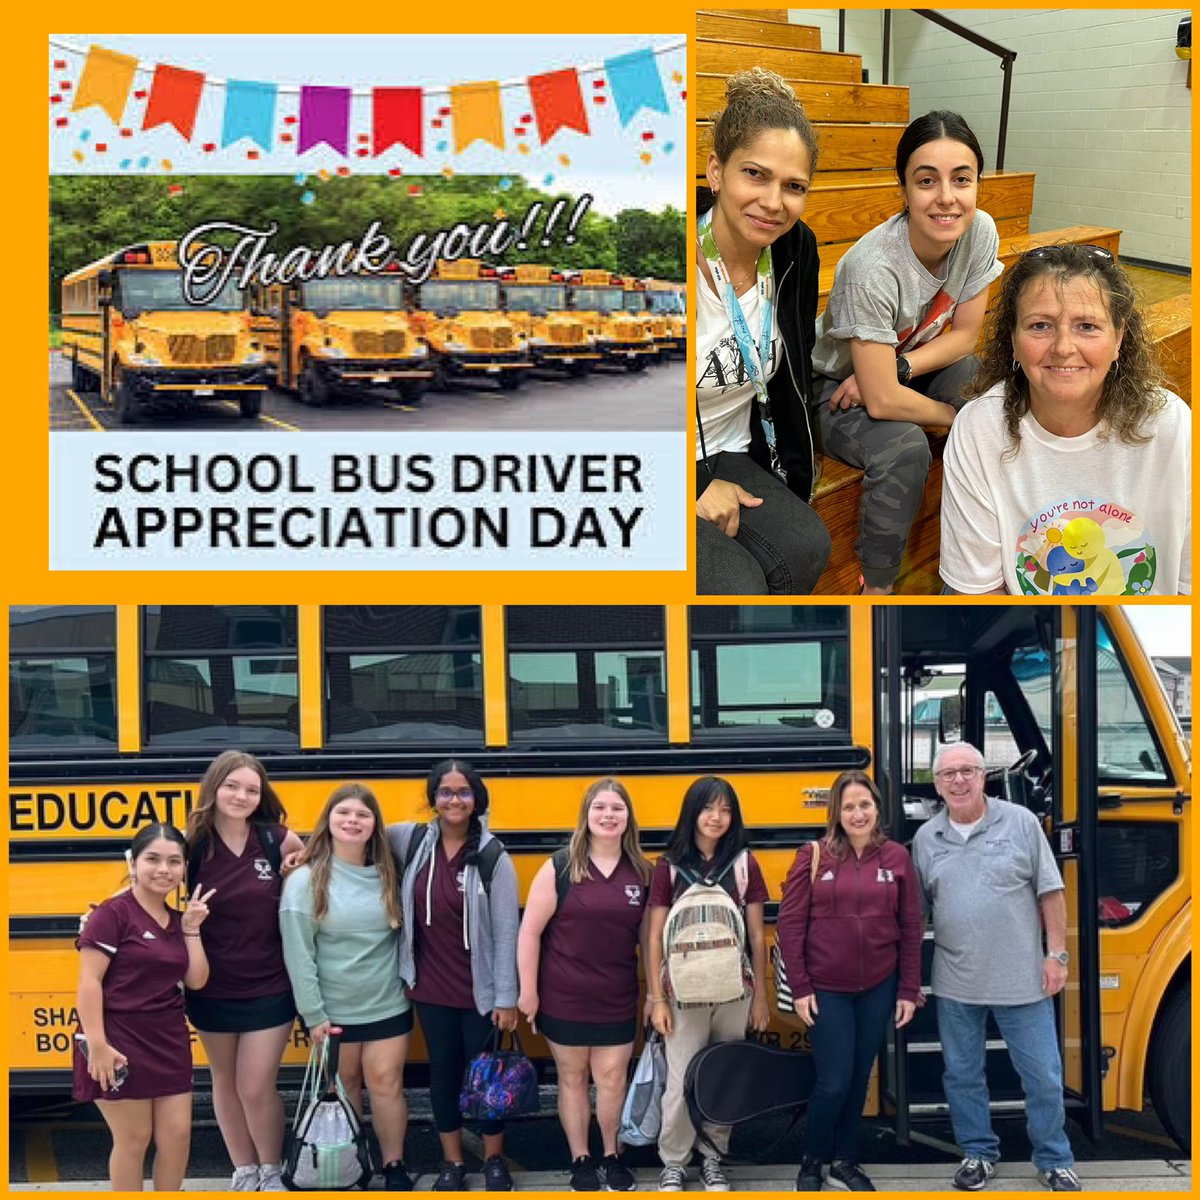 A Big SHOUT OUT to our Outstanding Bus Drivers on #SchoolBusDriversDay!! 🚌Thank you for getting us safely to our destinations every day. All of you are a BIG part of why our Athletic program runs so smoothly. #Thankful 🙏#WildcatFamily #Appreciate 🅱️🐾🚌